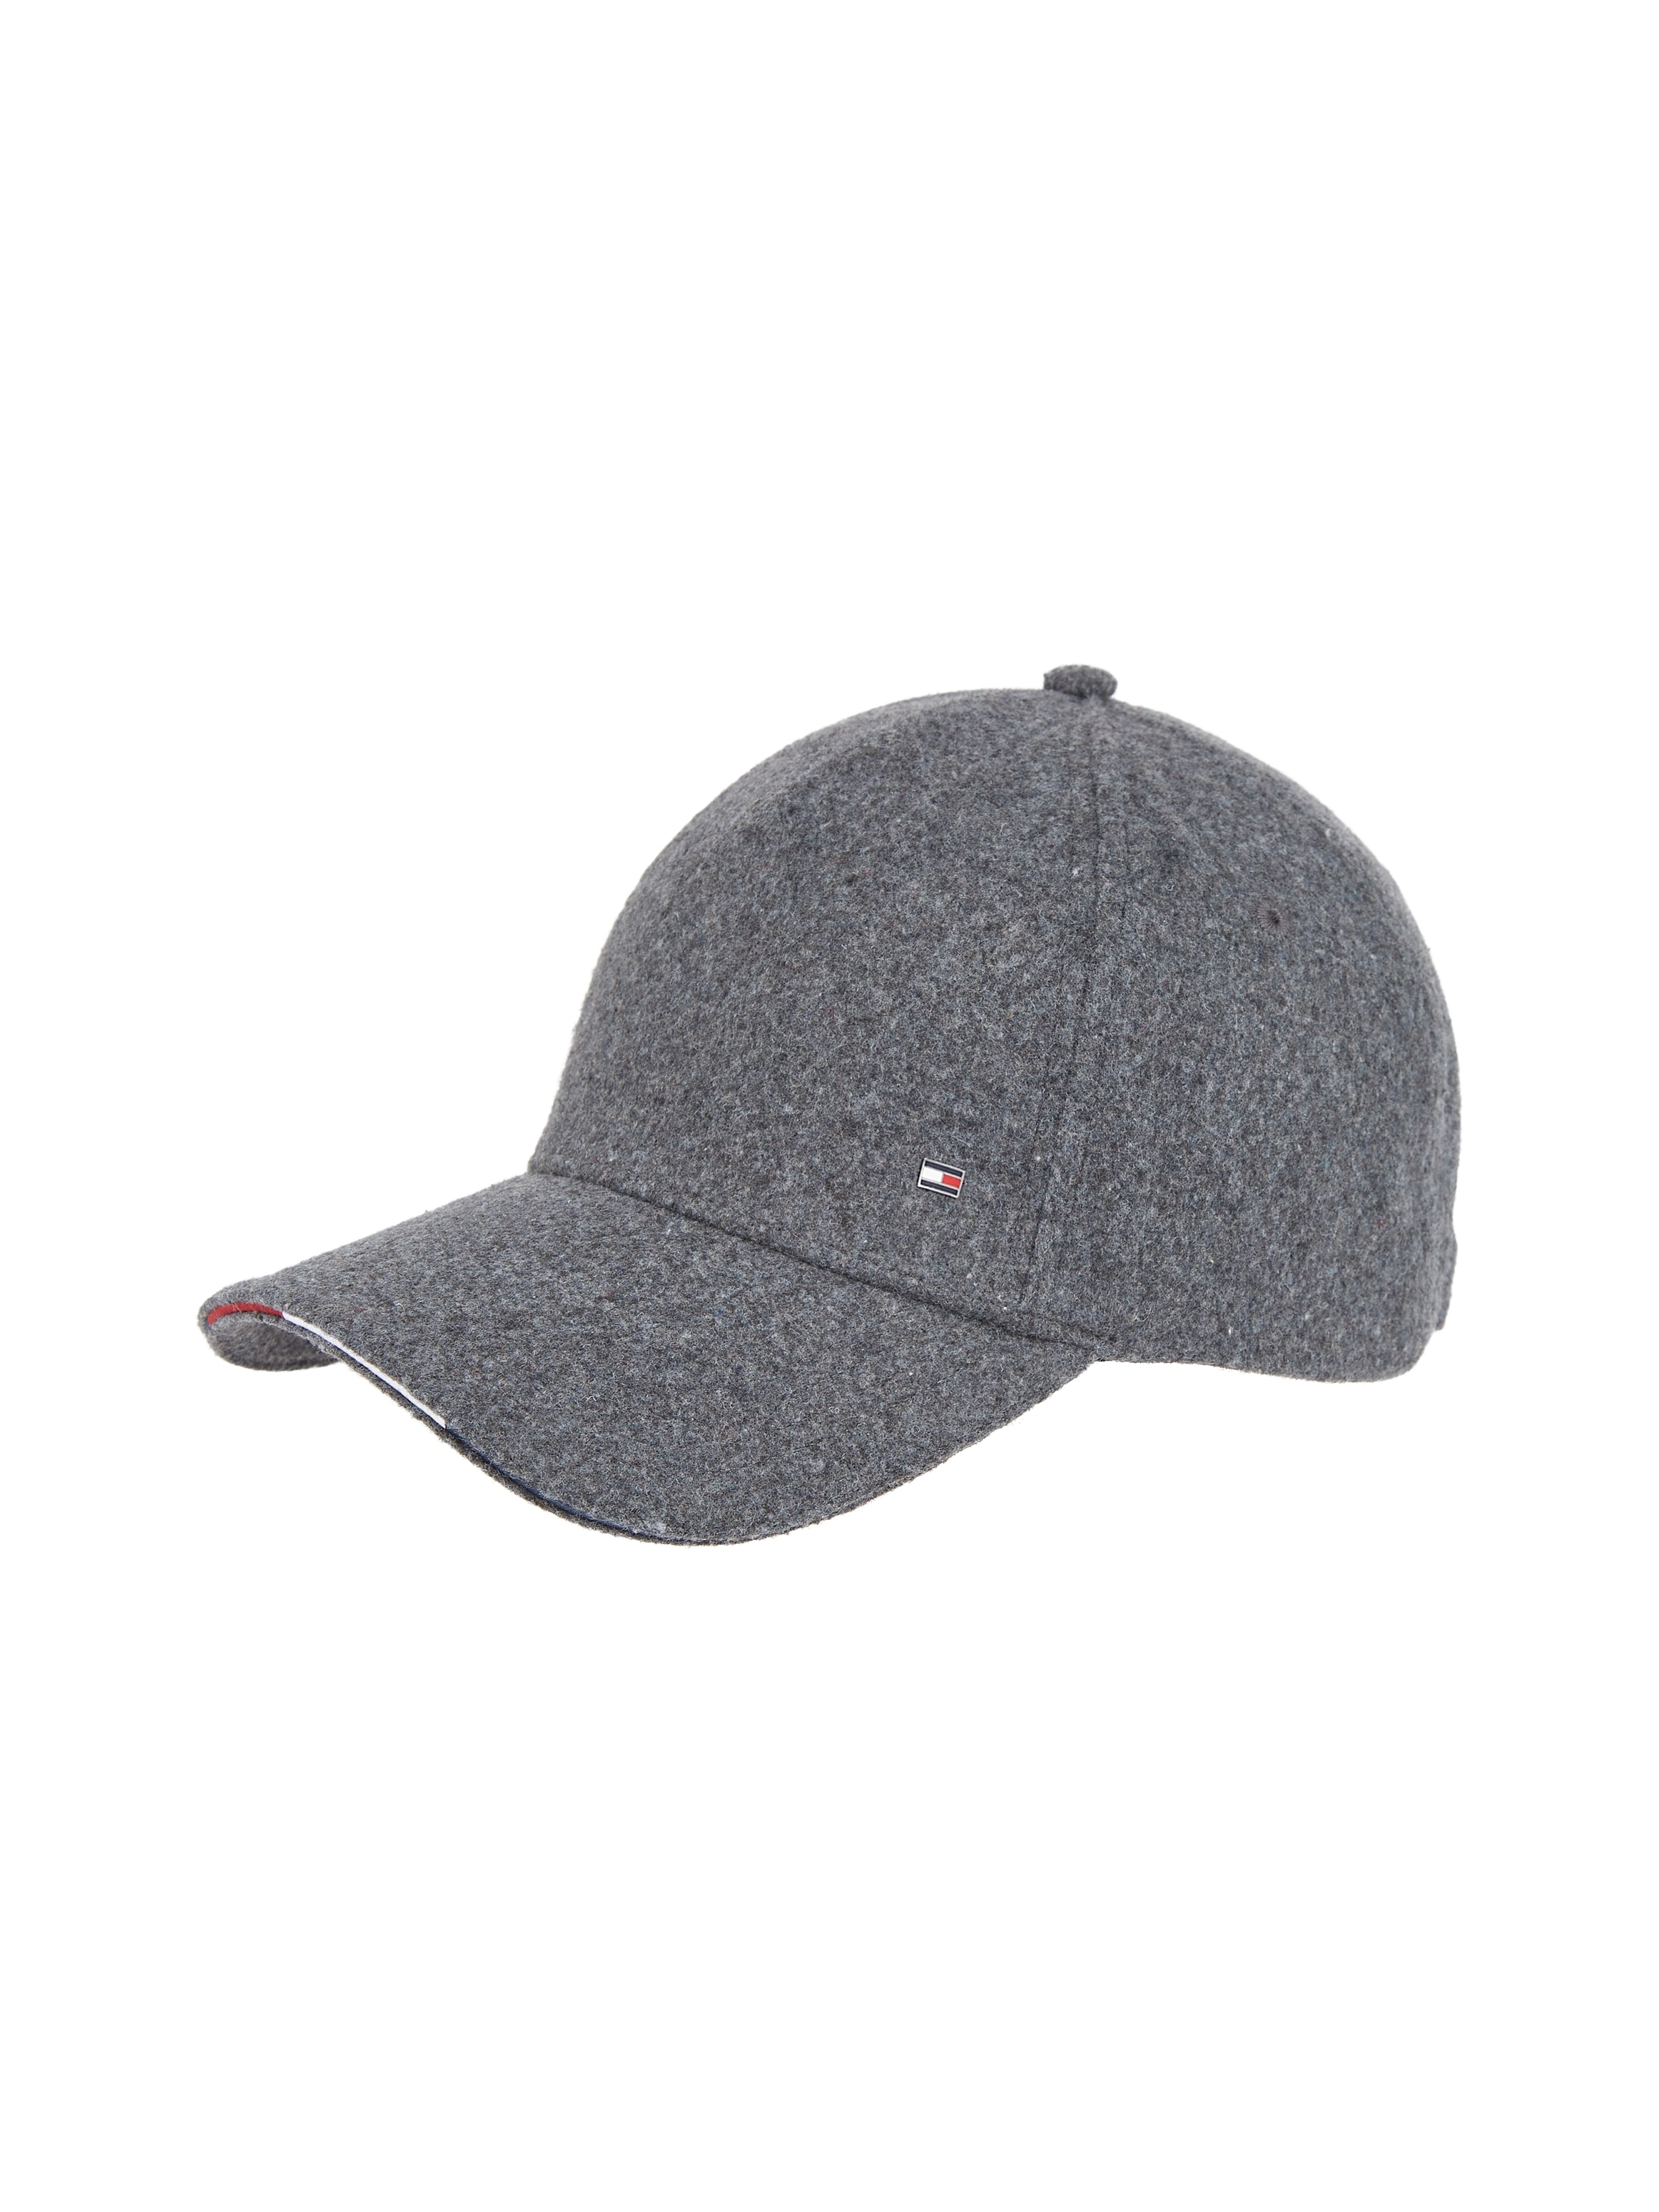 und Tommy Hilfiger Baseball CAP«, Tommy- Tape Flag mit »ELEVATED Cap online UNIVERSAL CORPORATE bei